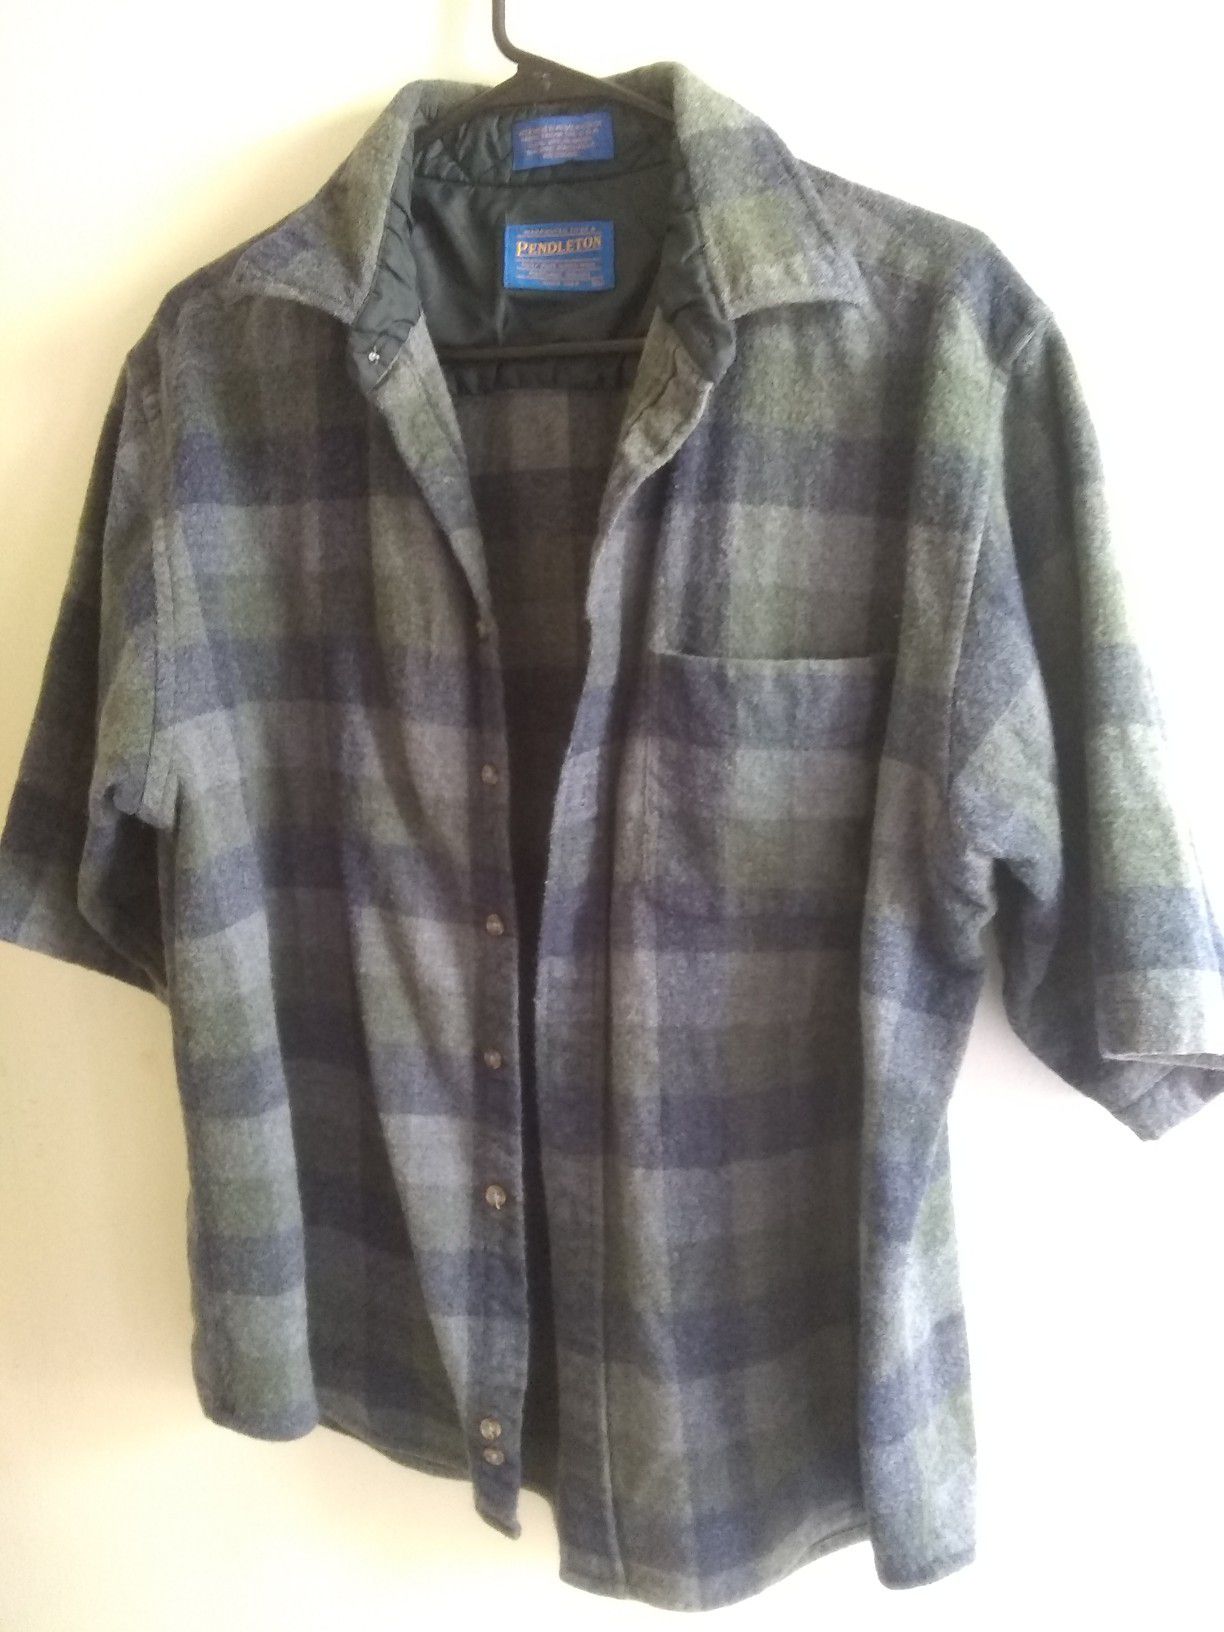 Pendleton Mens Wool Short Sleeve Front Button Shirt XL Plaid Green and Grey